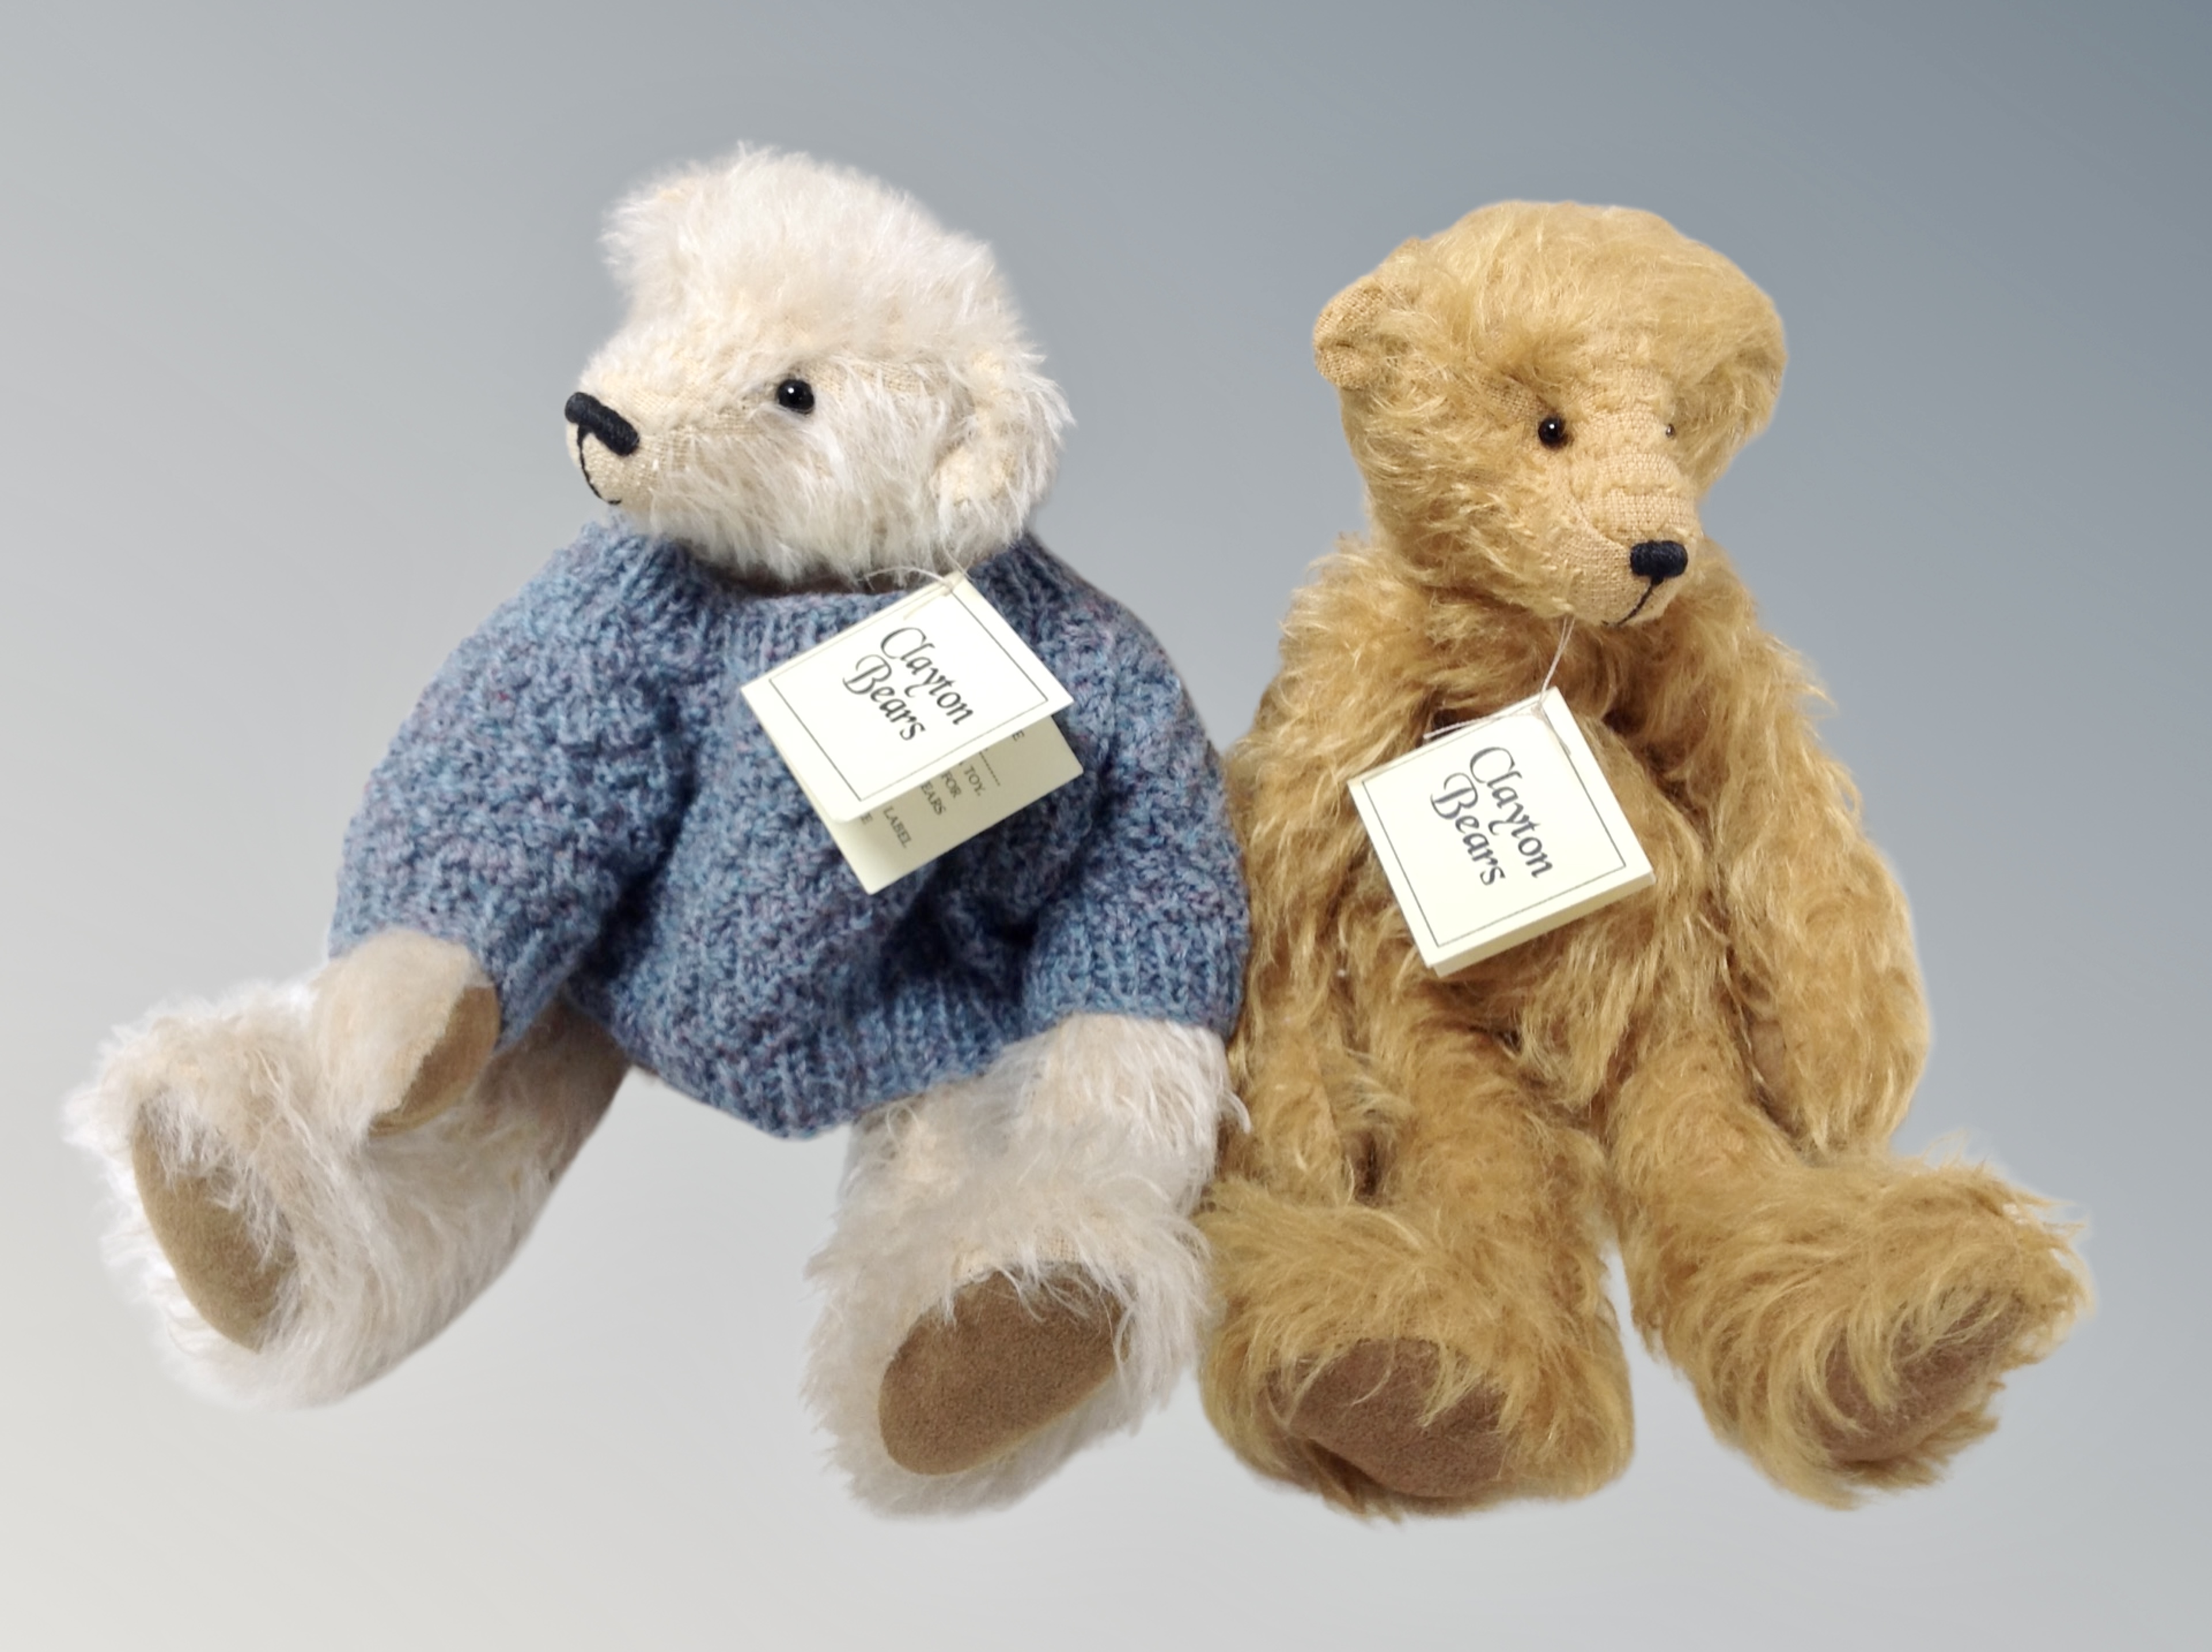 Two Clayton bears - Rufus and Ernie with tags